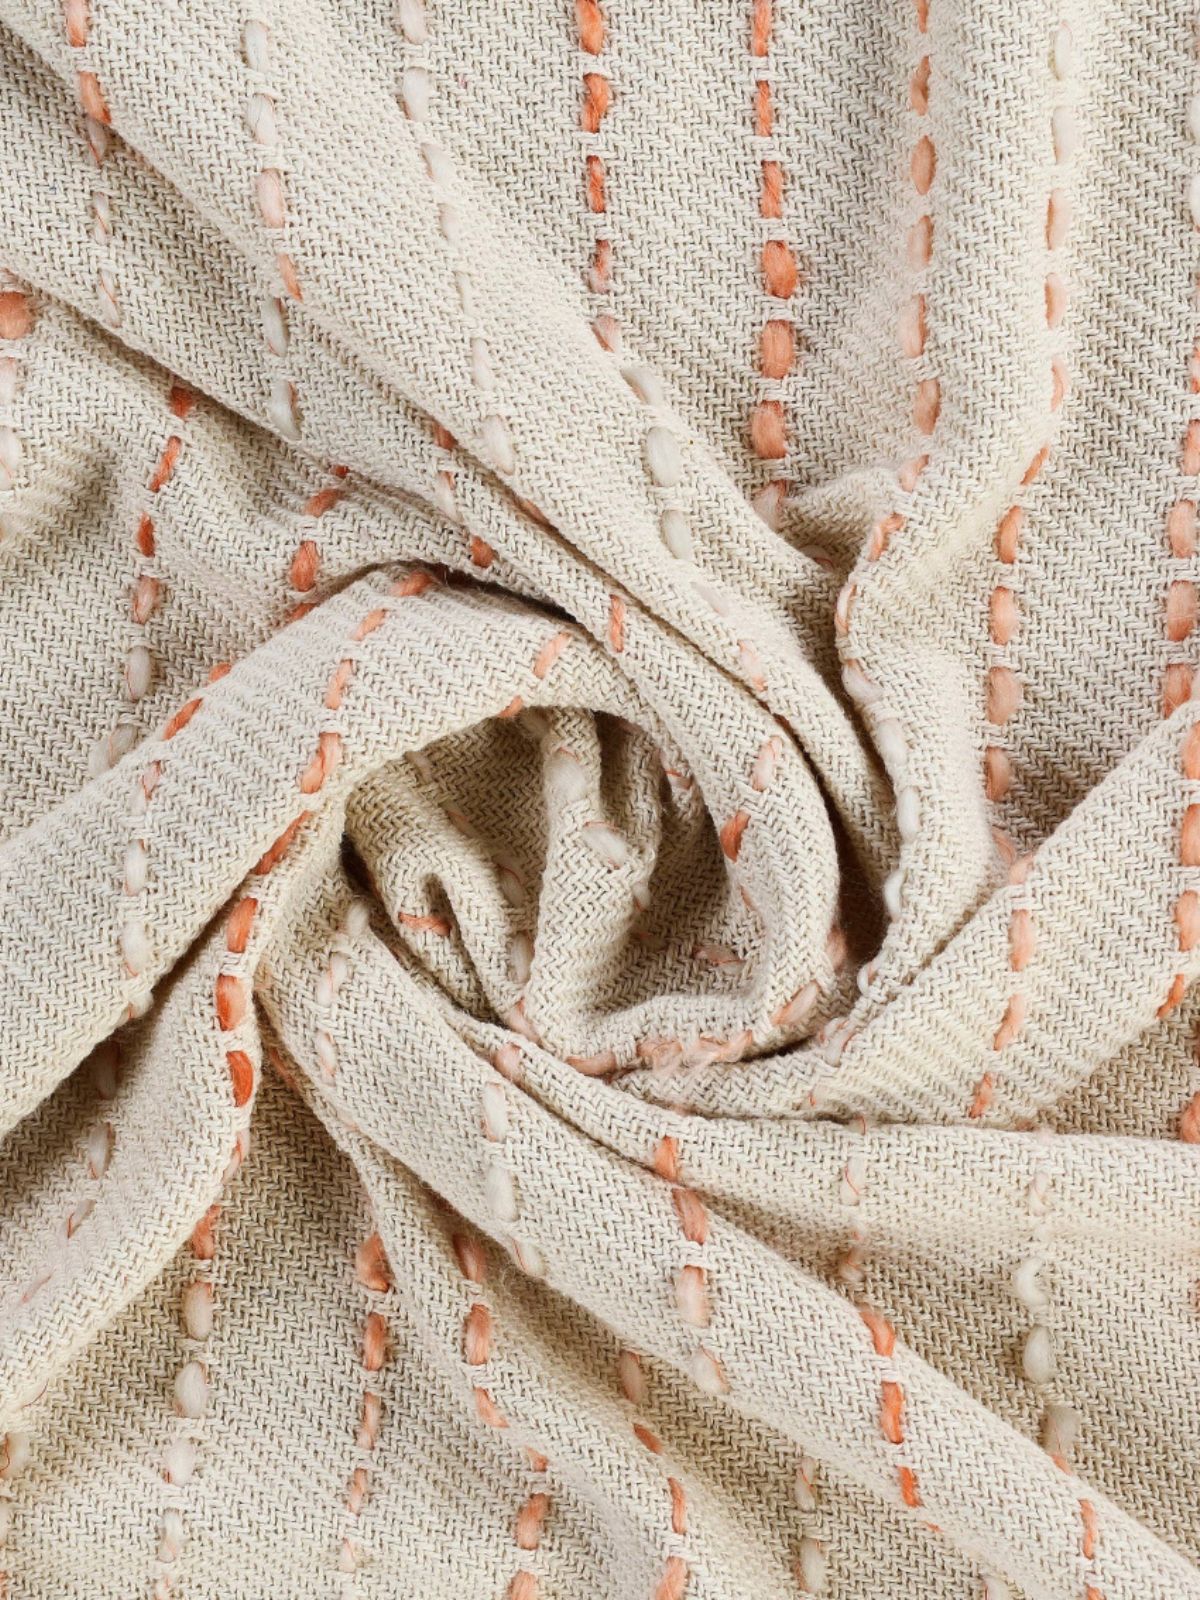 Peach Stripe Woven Cotton Throw Blanket with Fringe Folded, 50W x 60L. 